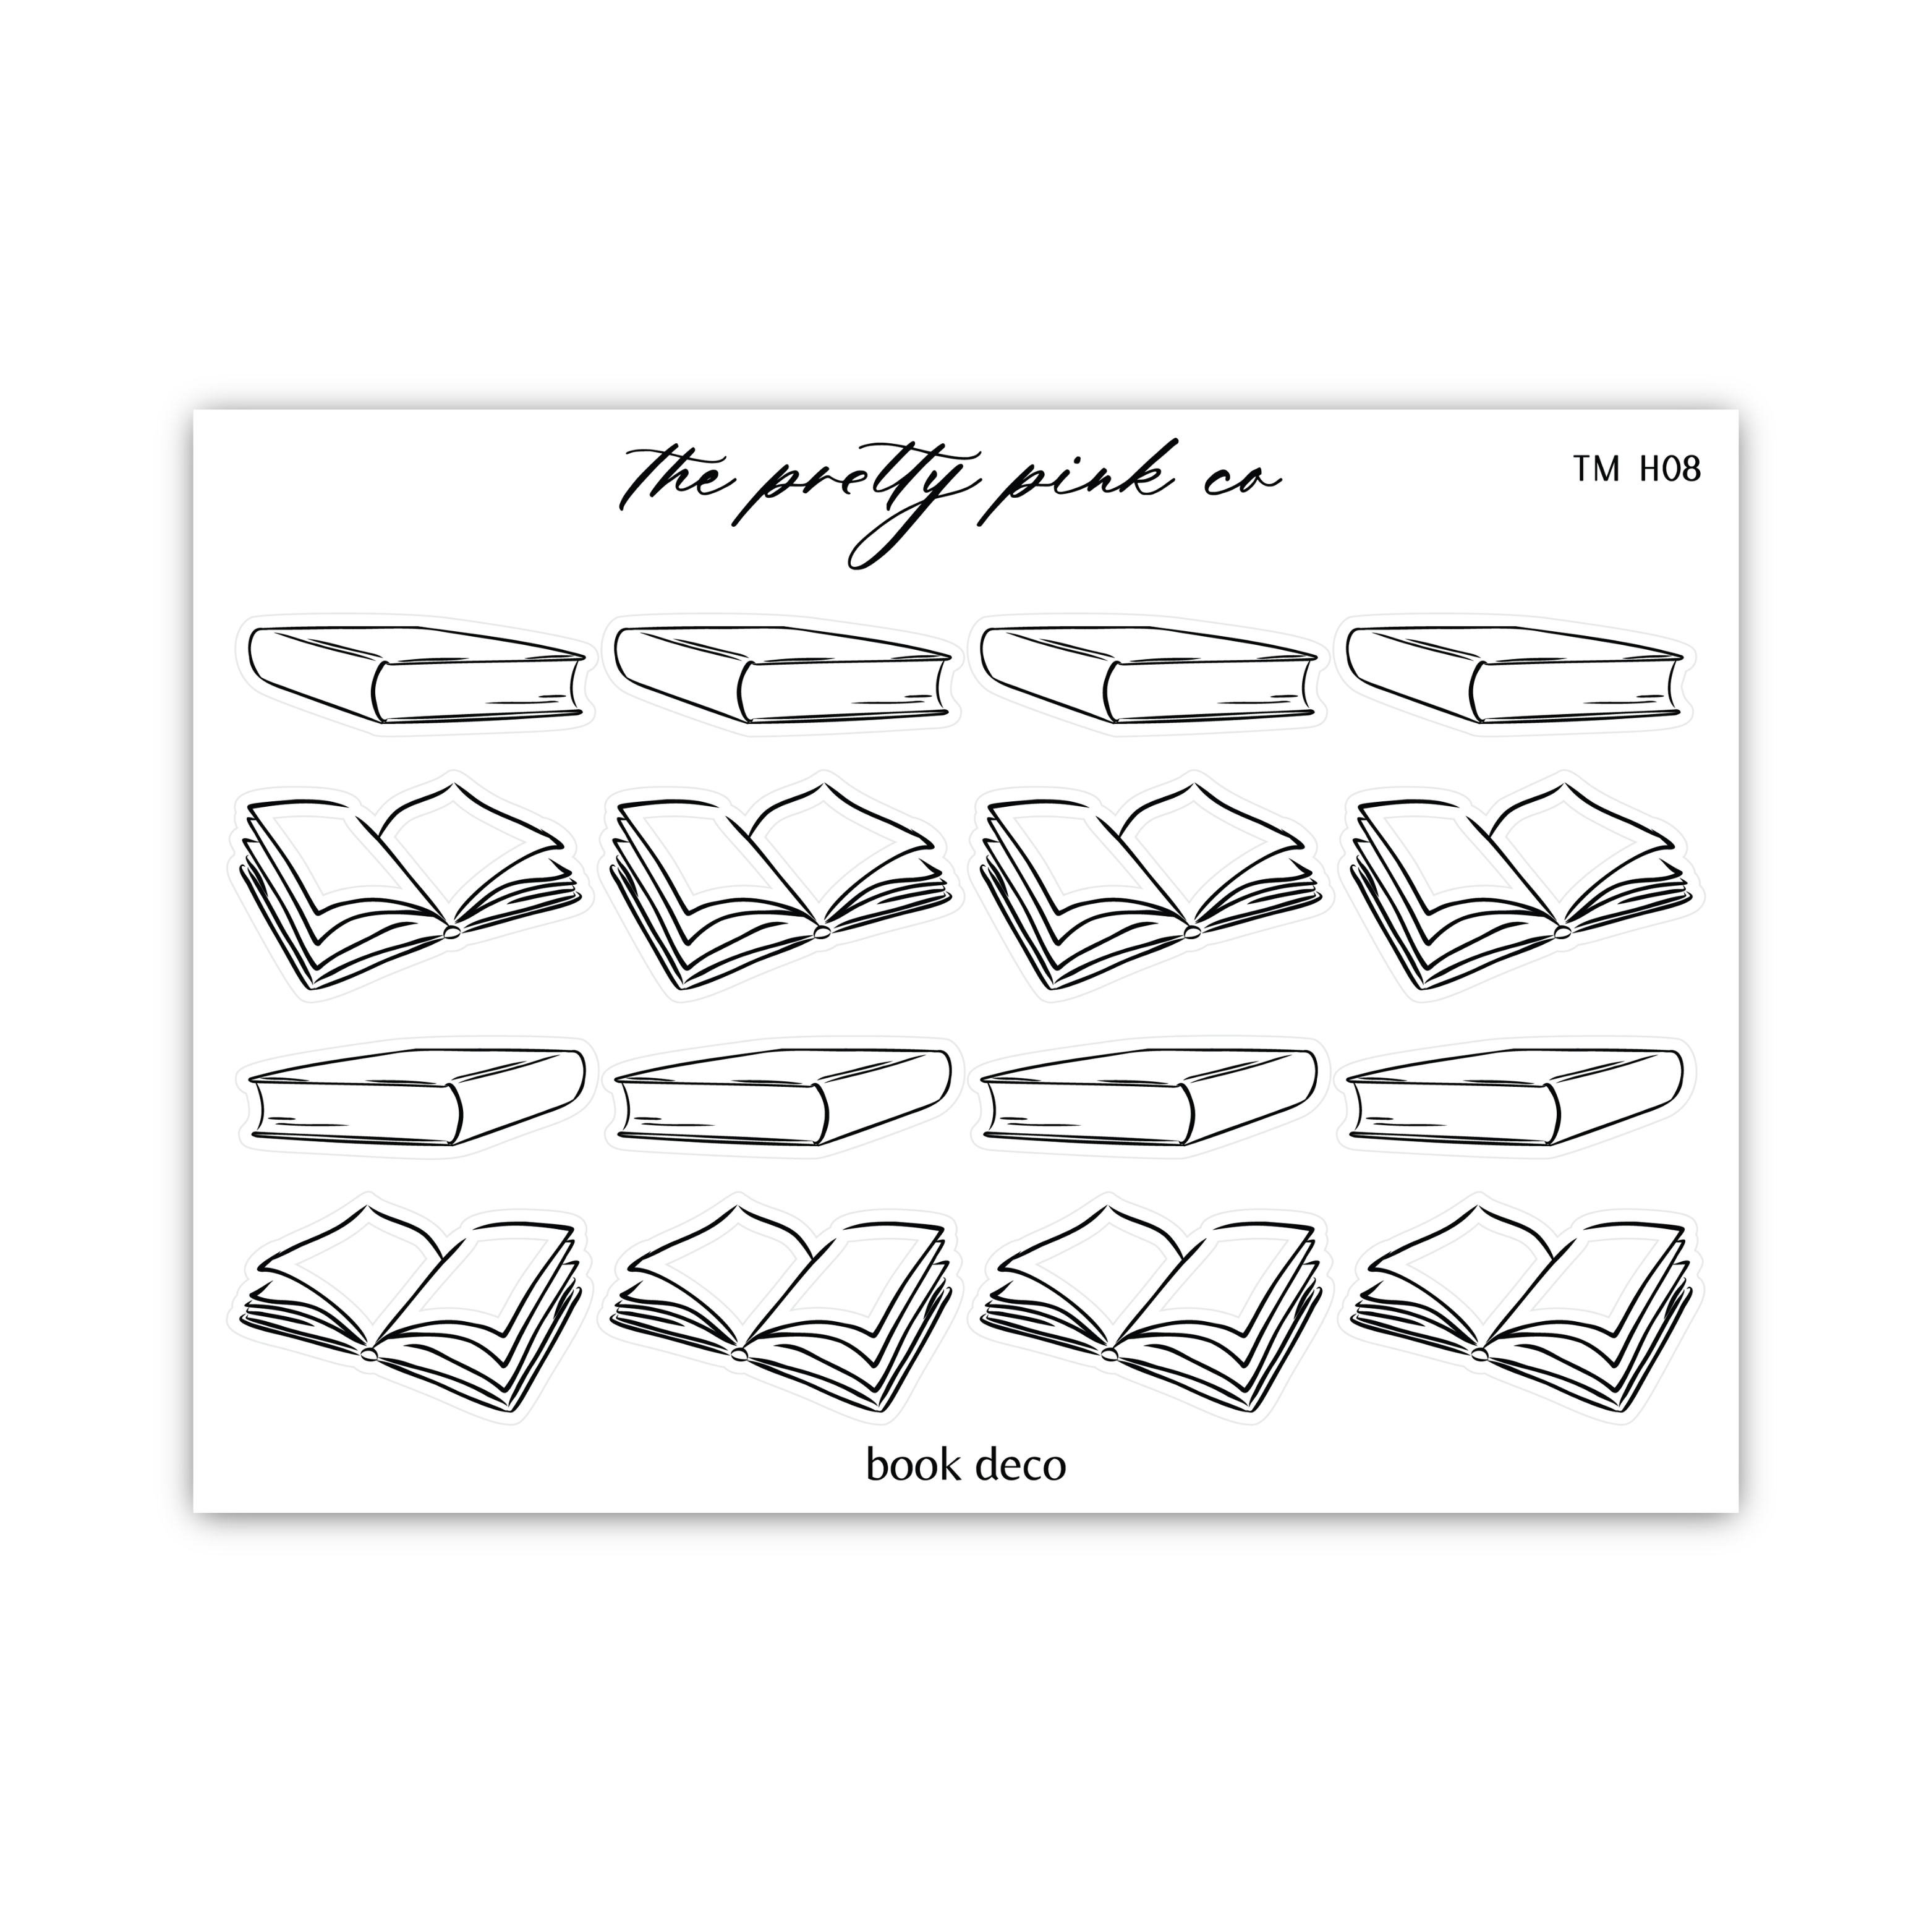 a black and white drawing of a book